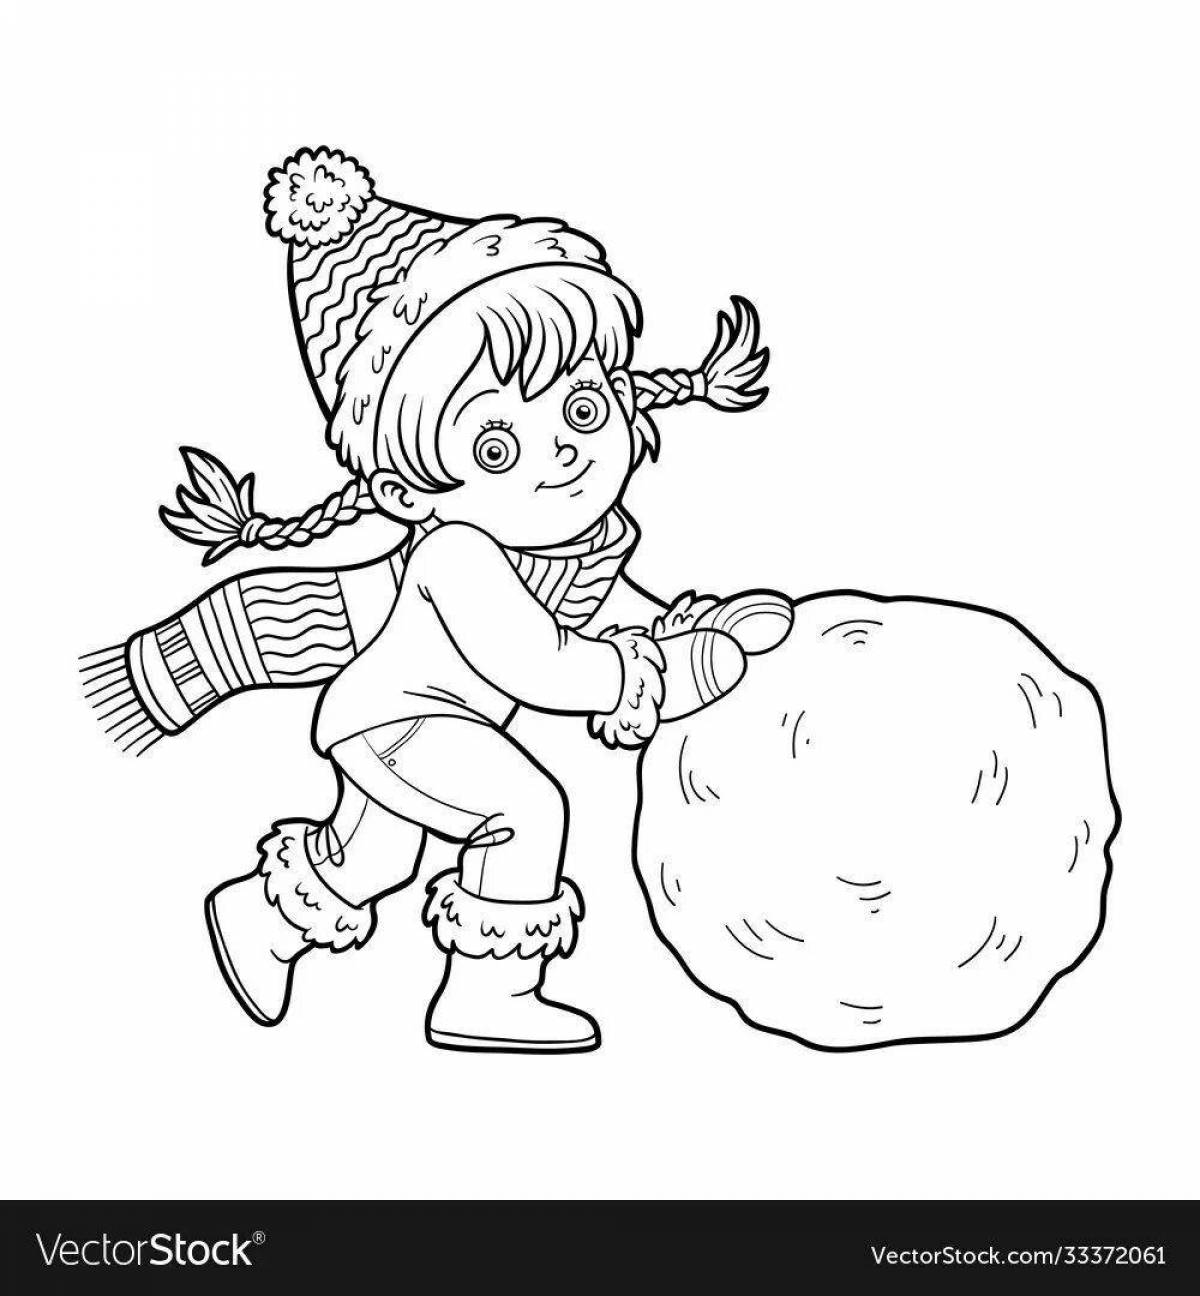 Coloring-discovery coloring page com